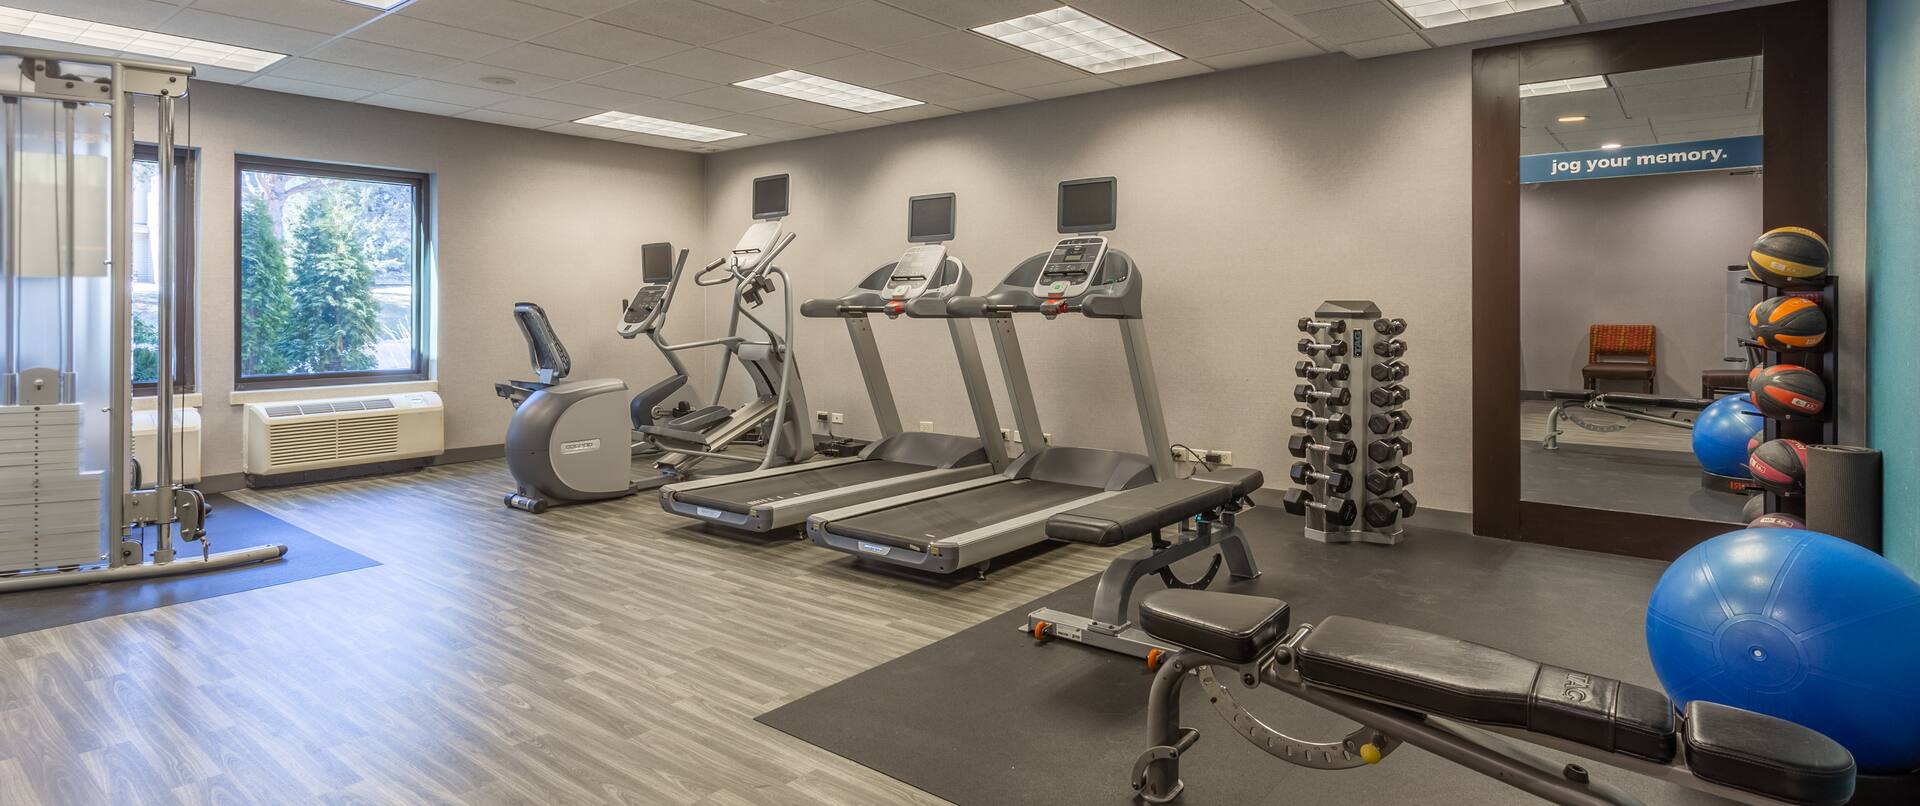 Cardio equipment and hand weights for your workout